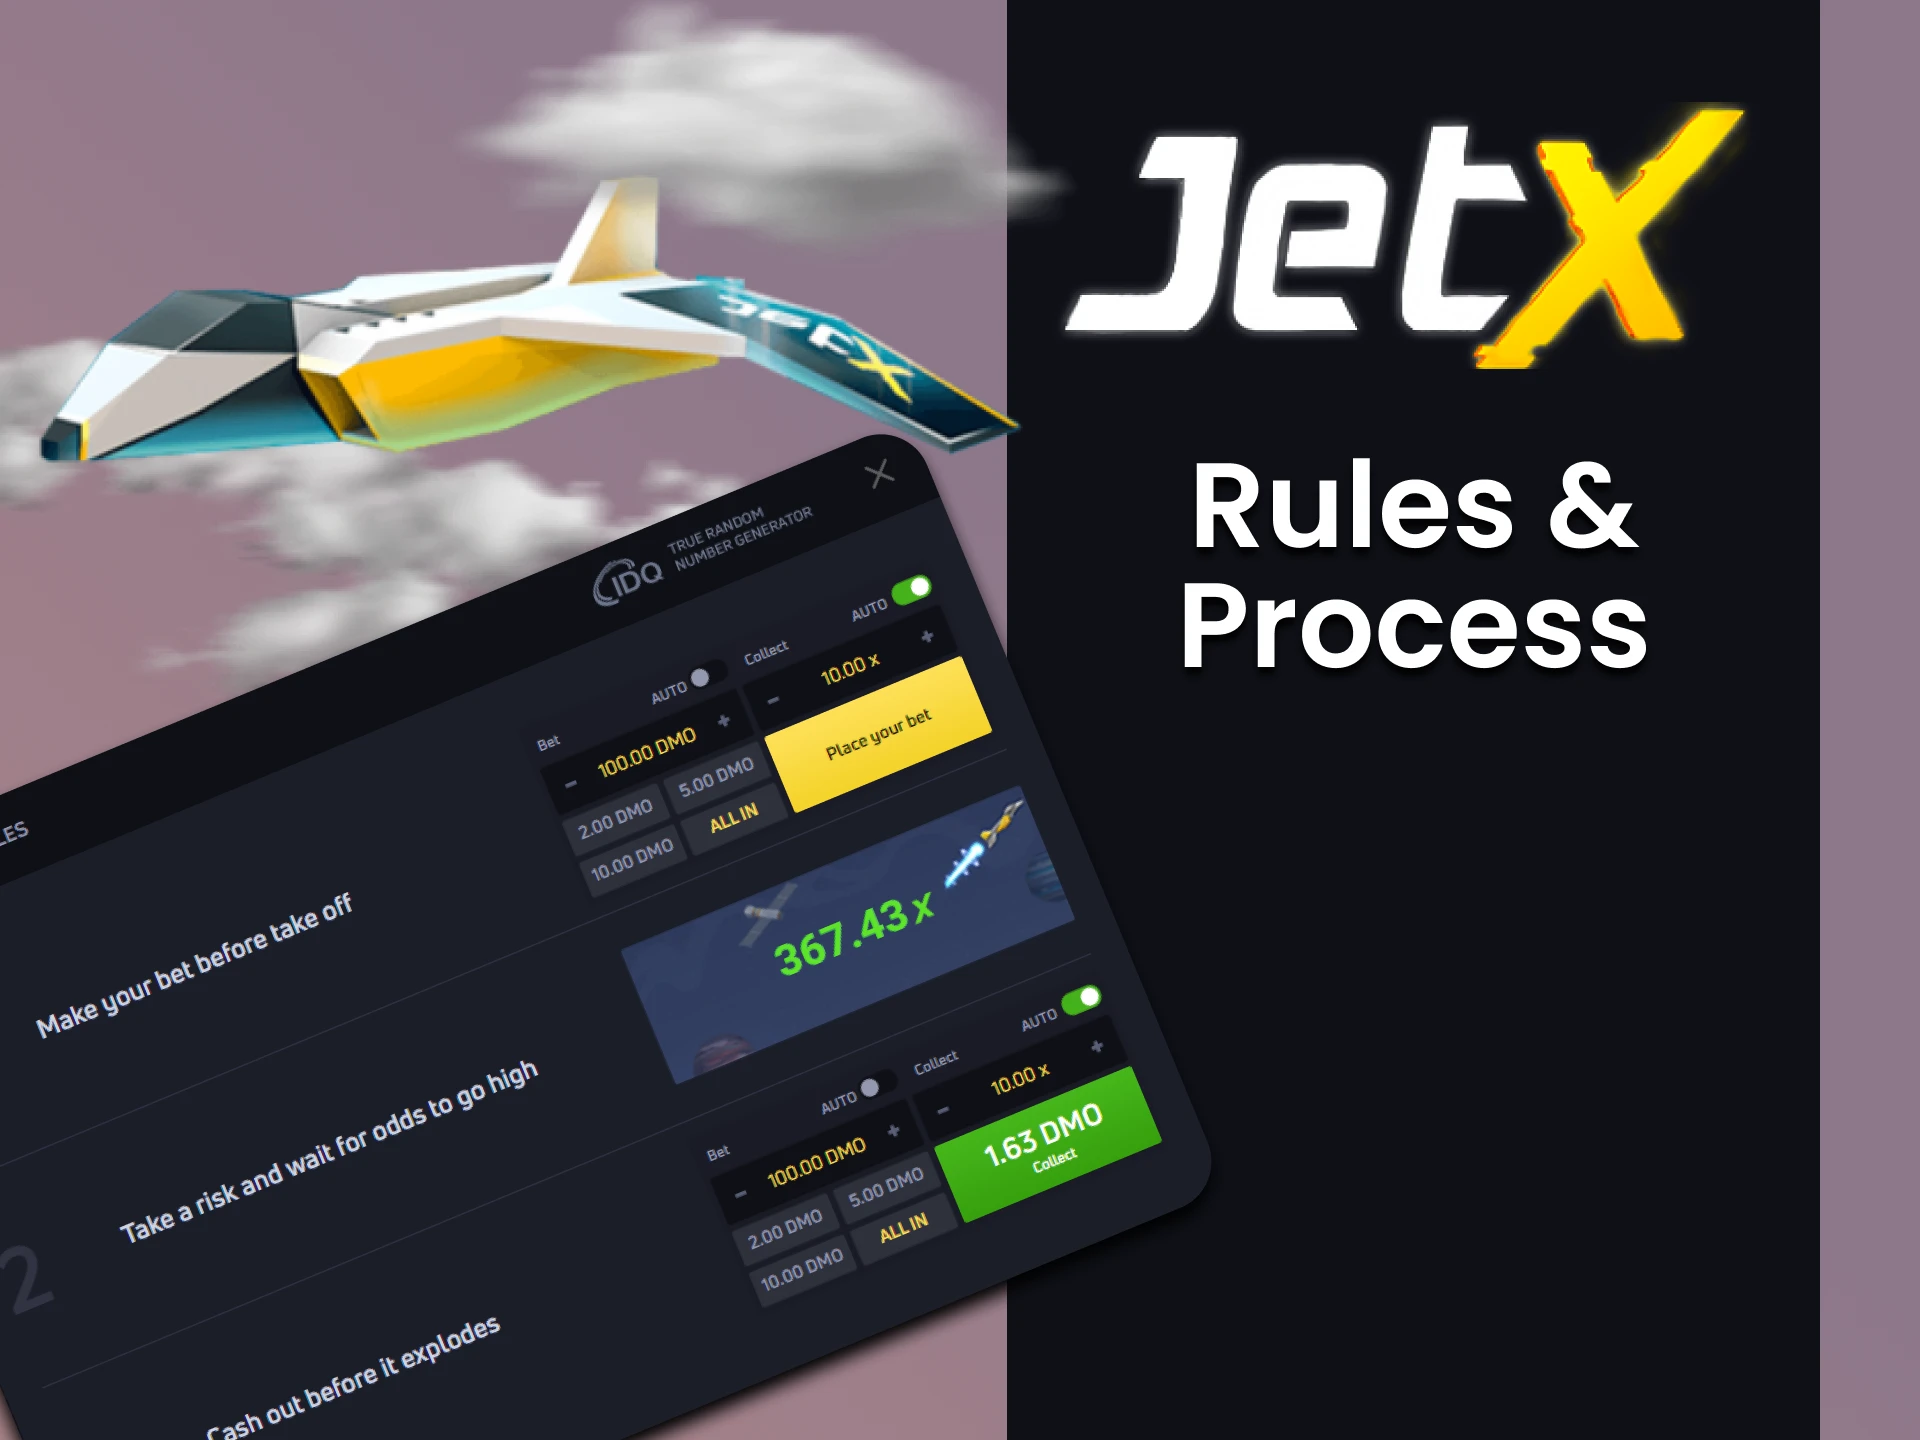 Learn the rules of the demo version of the JetX game.